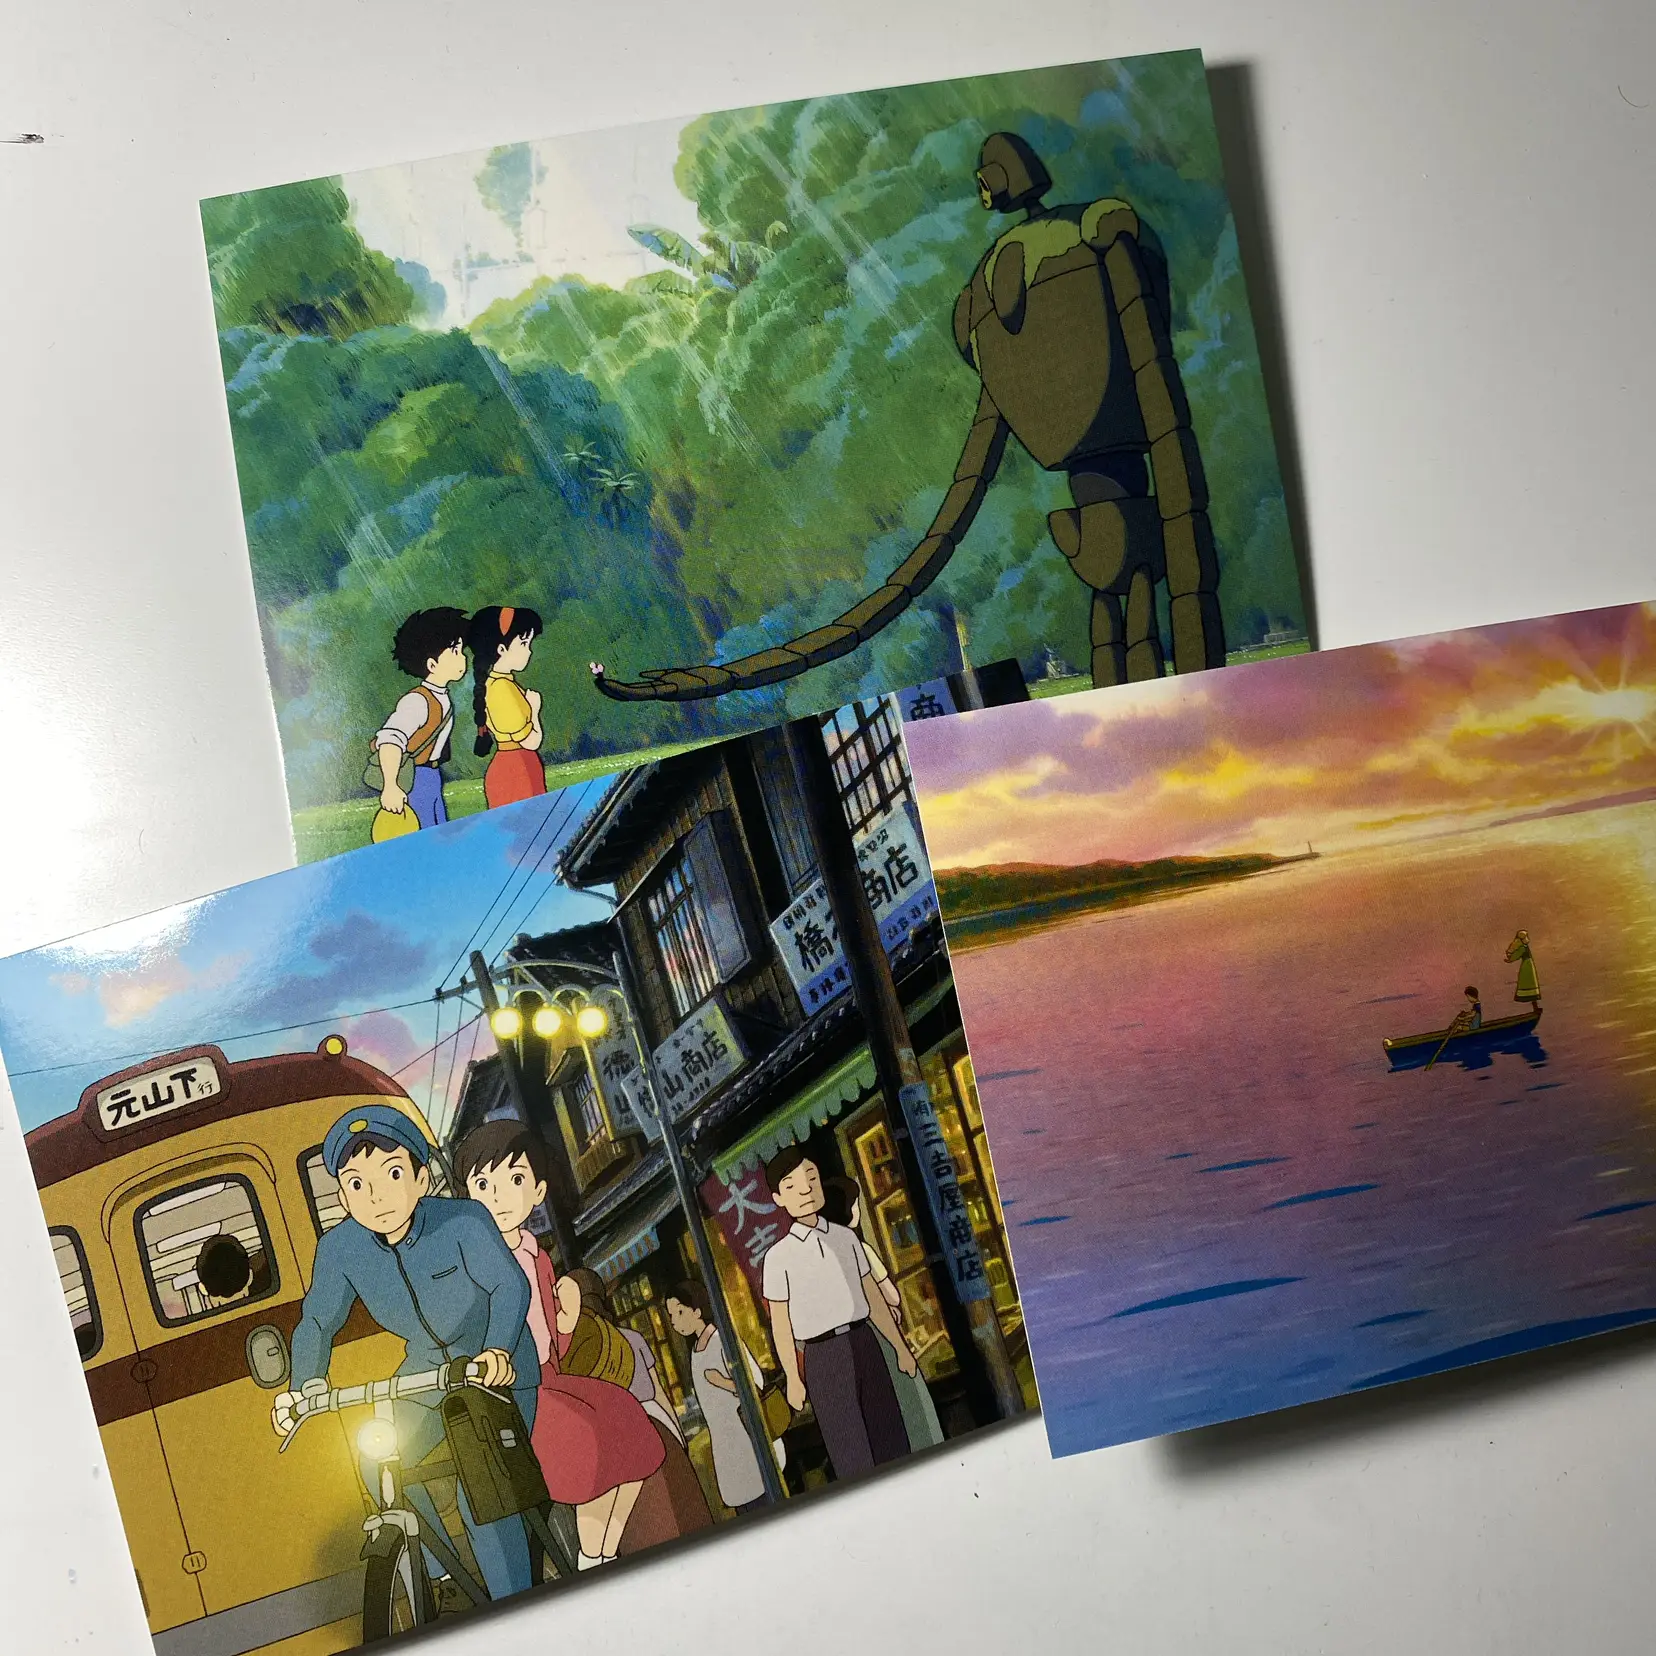 Studio Ghibli 100 Collectible Postcard For Fans - Ghibli Merch Store -  Official Studio Ghibli Merchandise